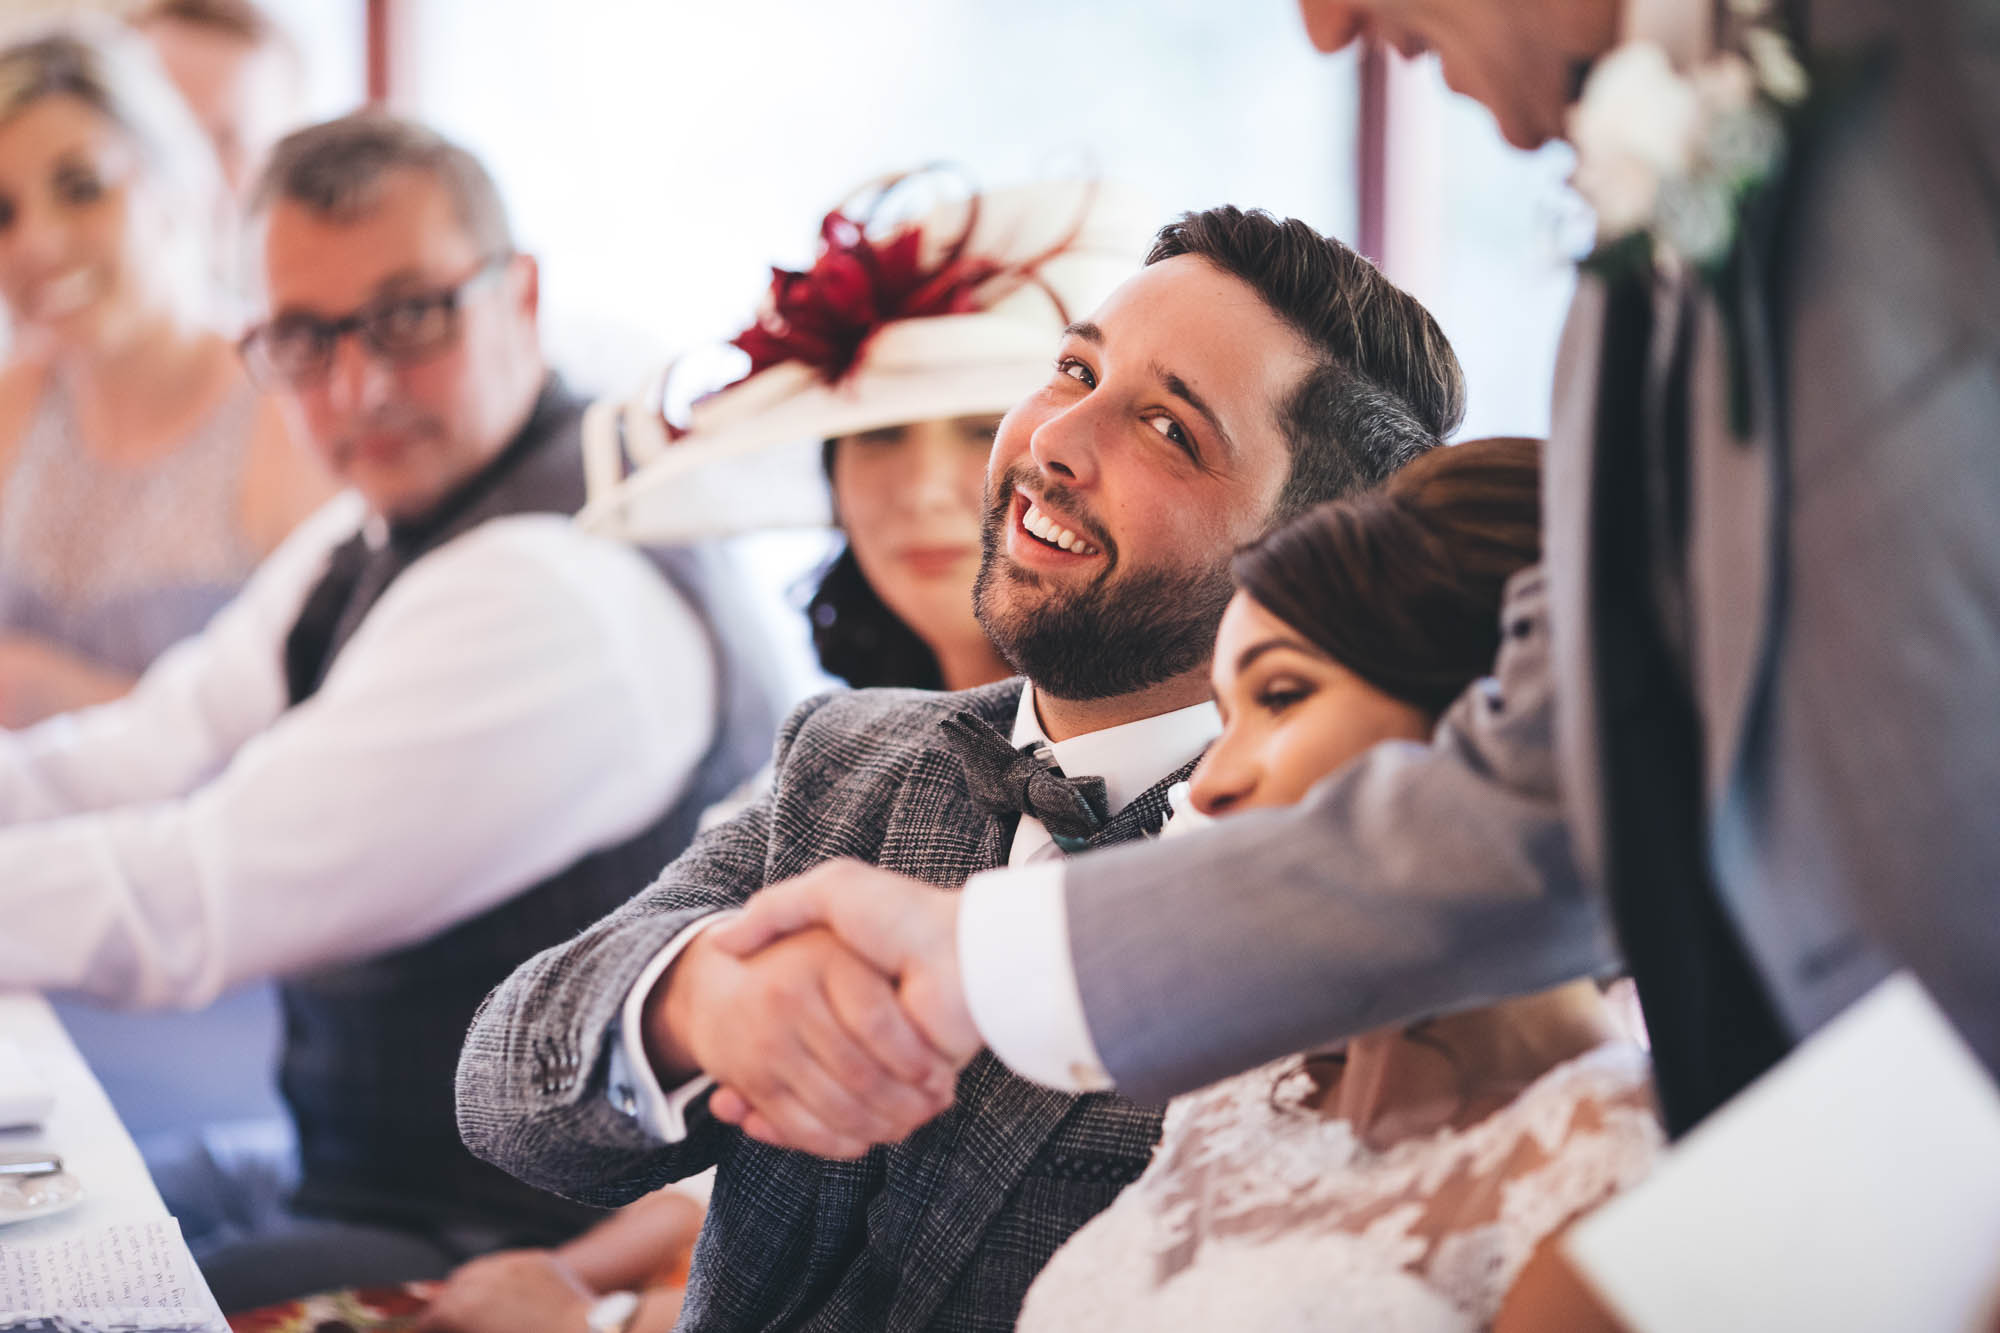 Groom shakes hand with Father of Bride during speech at top table